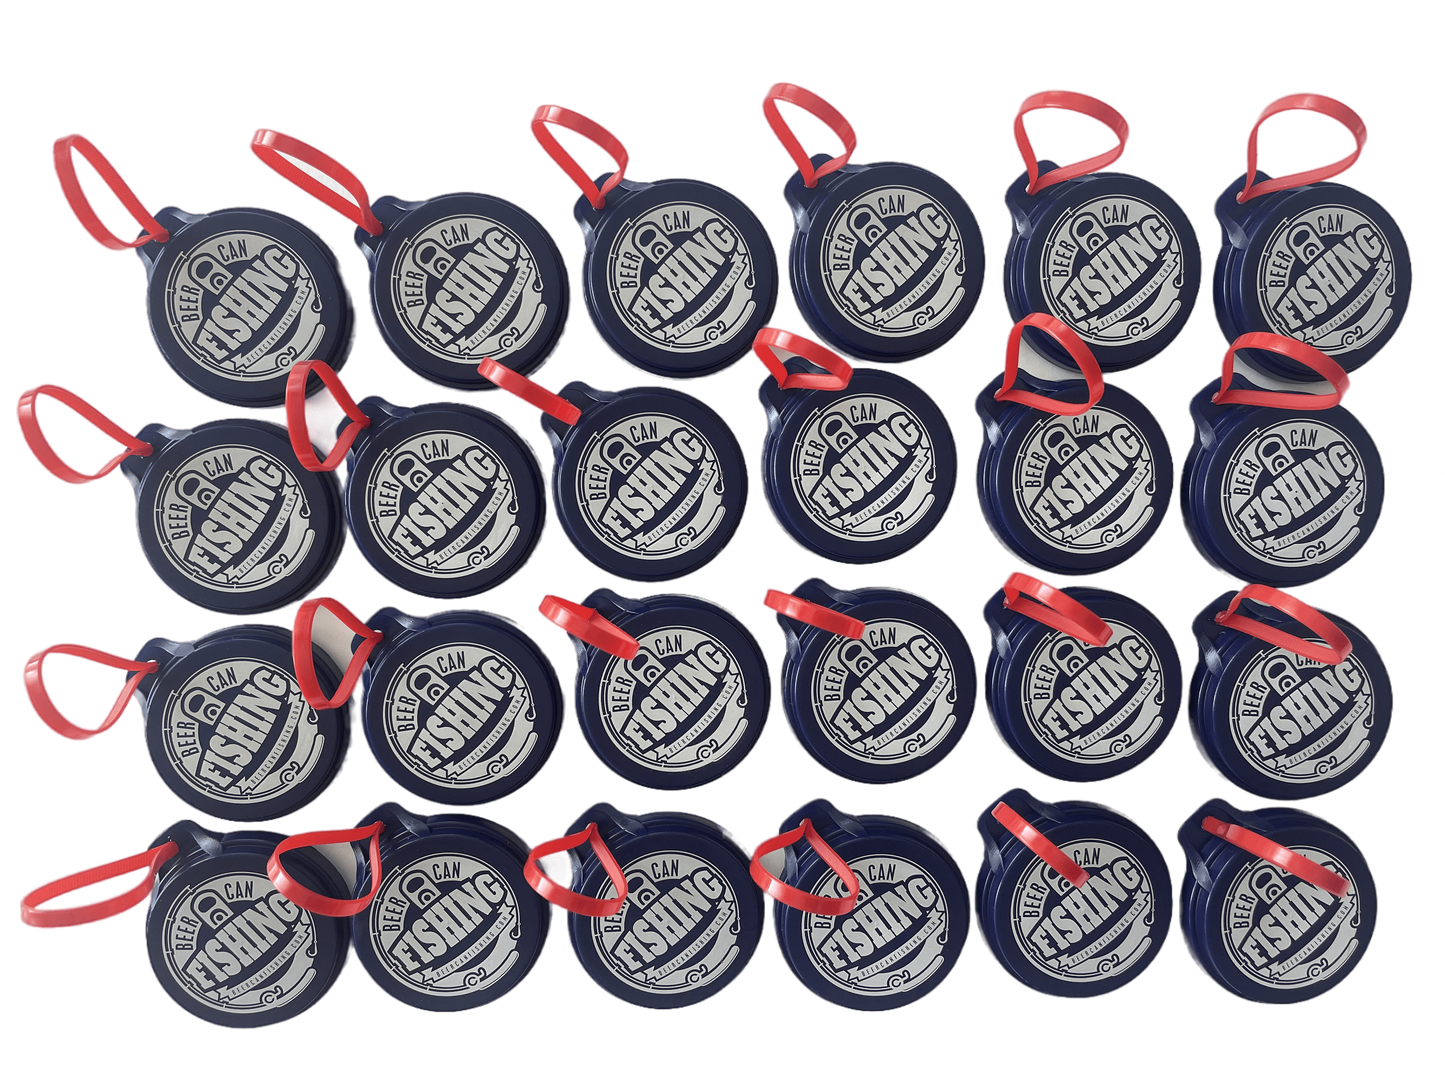 24 pack of beer can fishing game lids